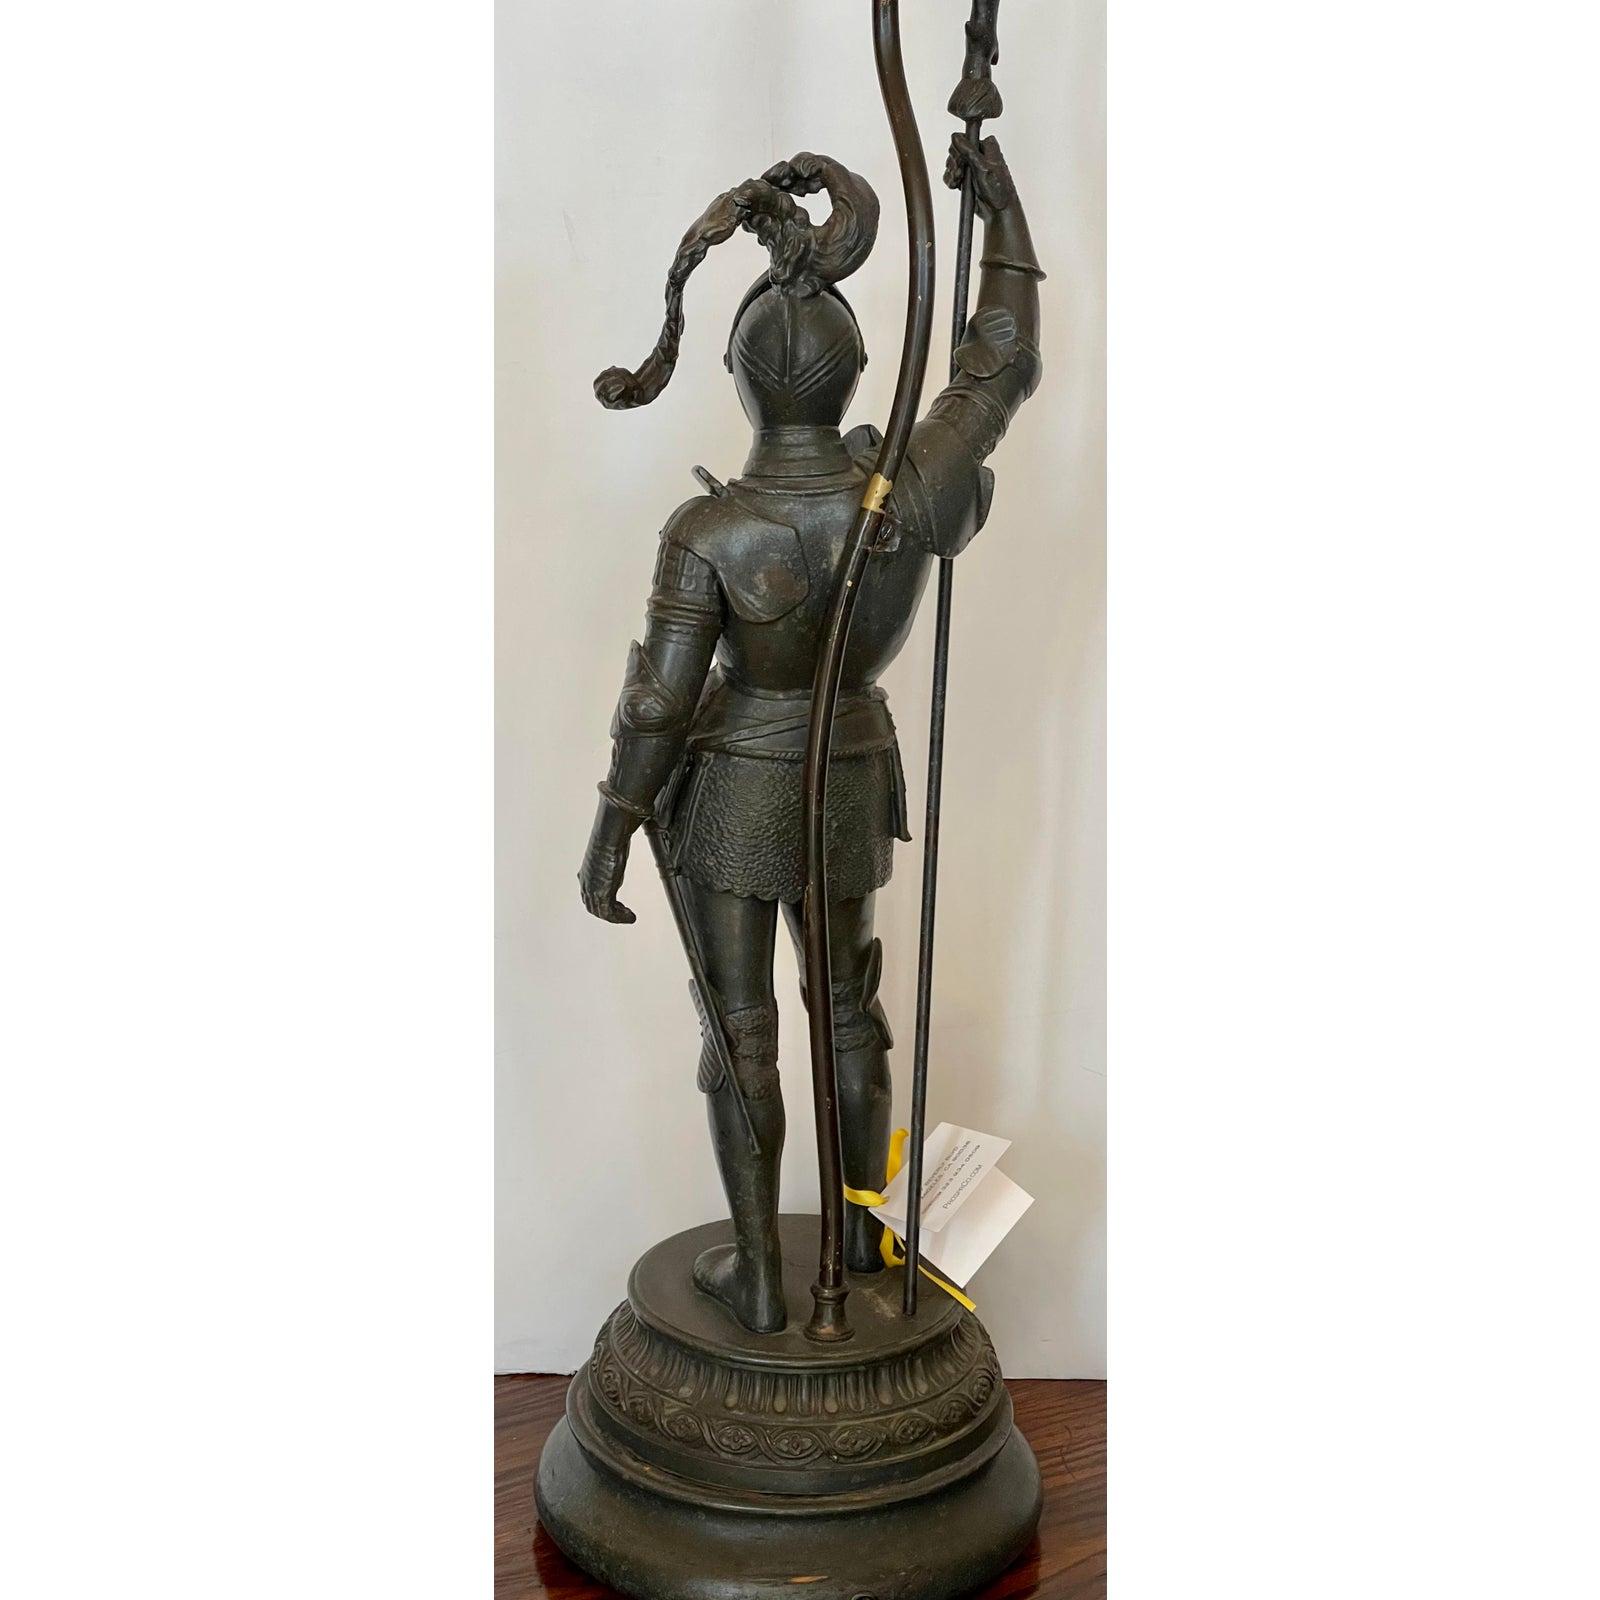 American Antique Knight in Armor Figural Table Lamp, Early 20th Century